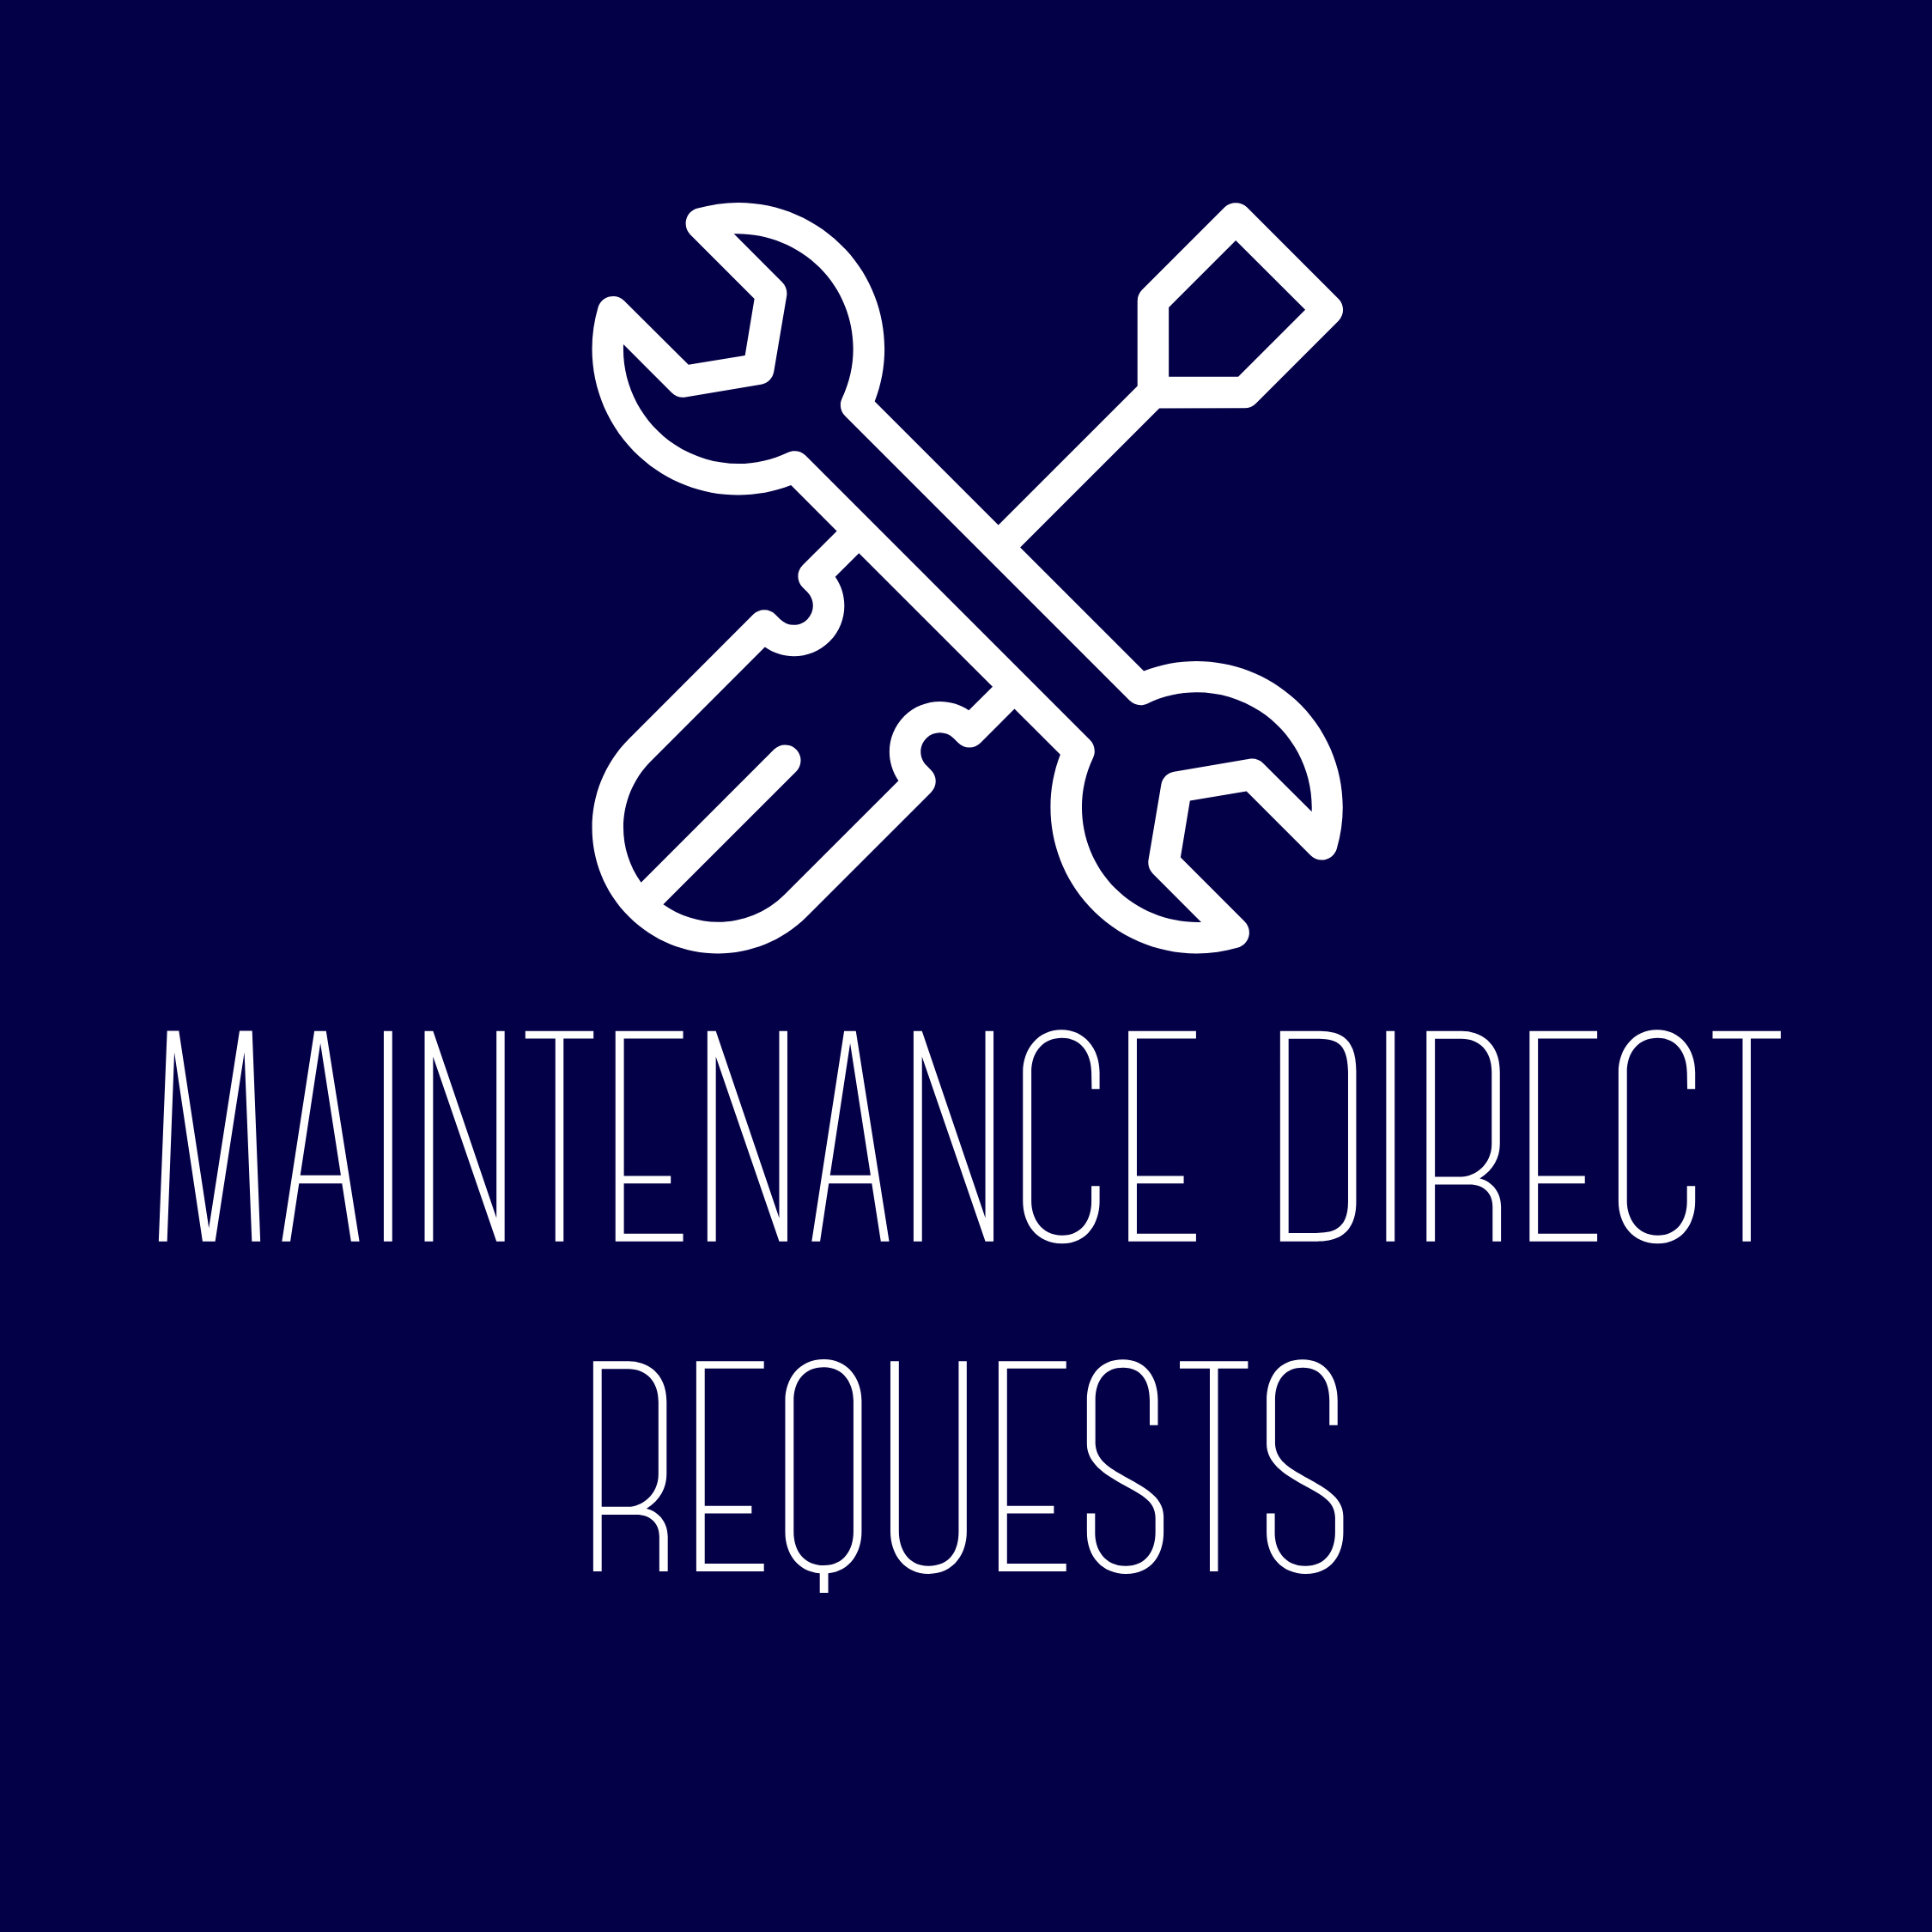 Maintenance Direct Requests